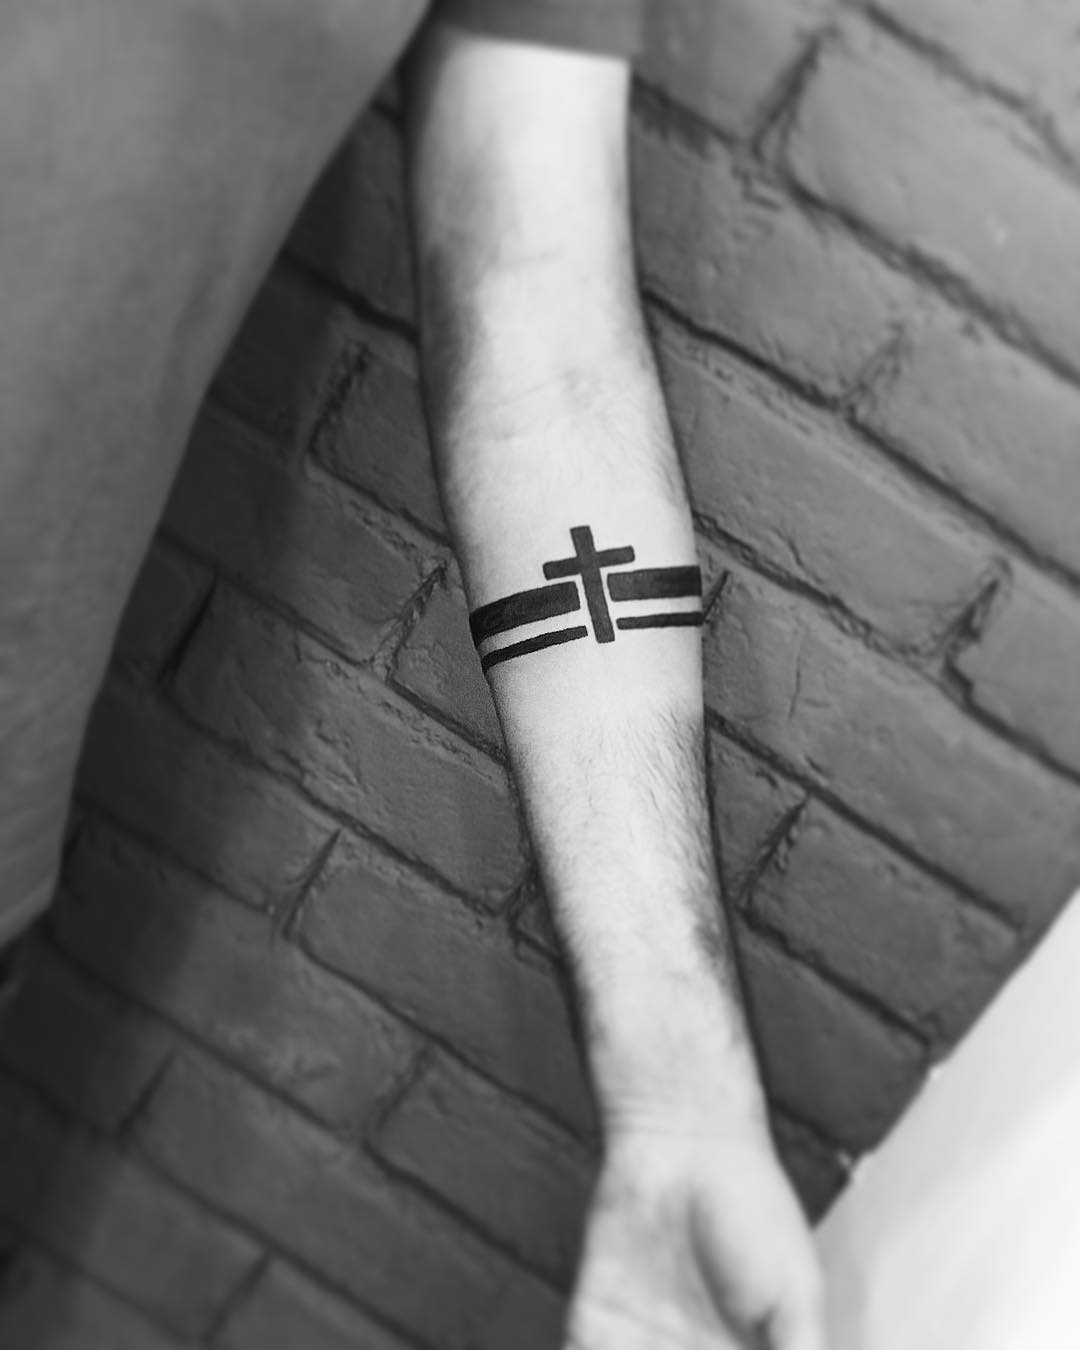 225 Best Cross Tattoo Designs With Meanings intended for dimensions 1080 X 1350